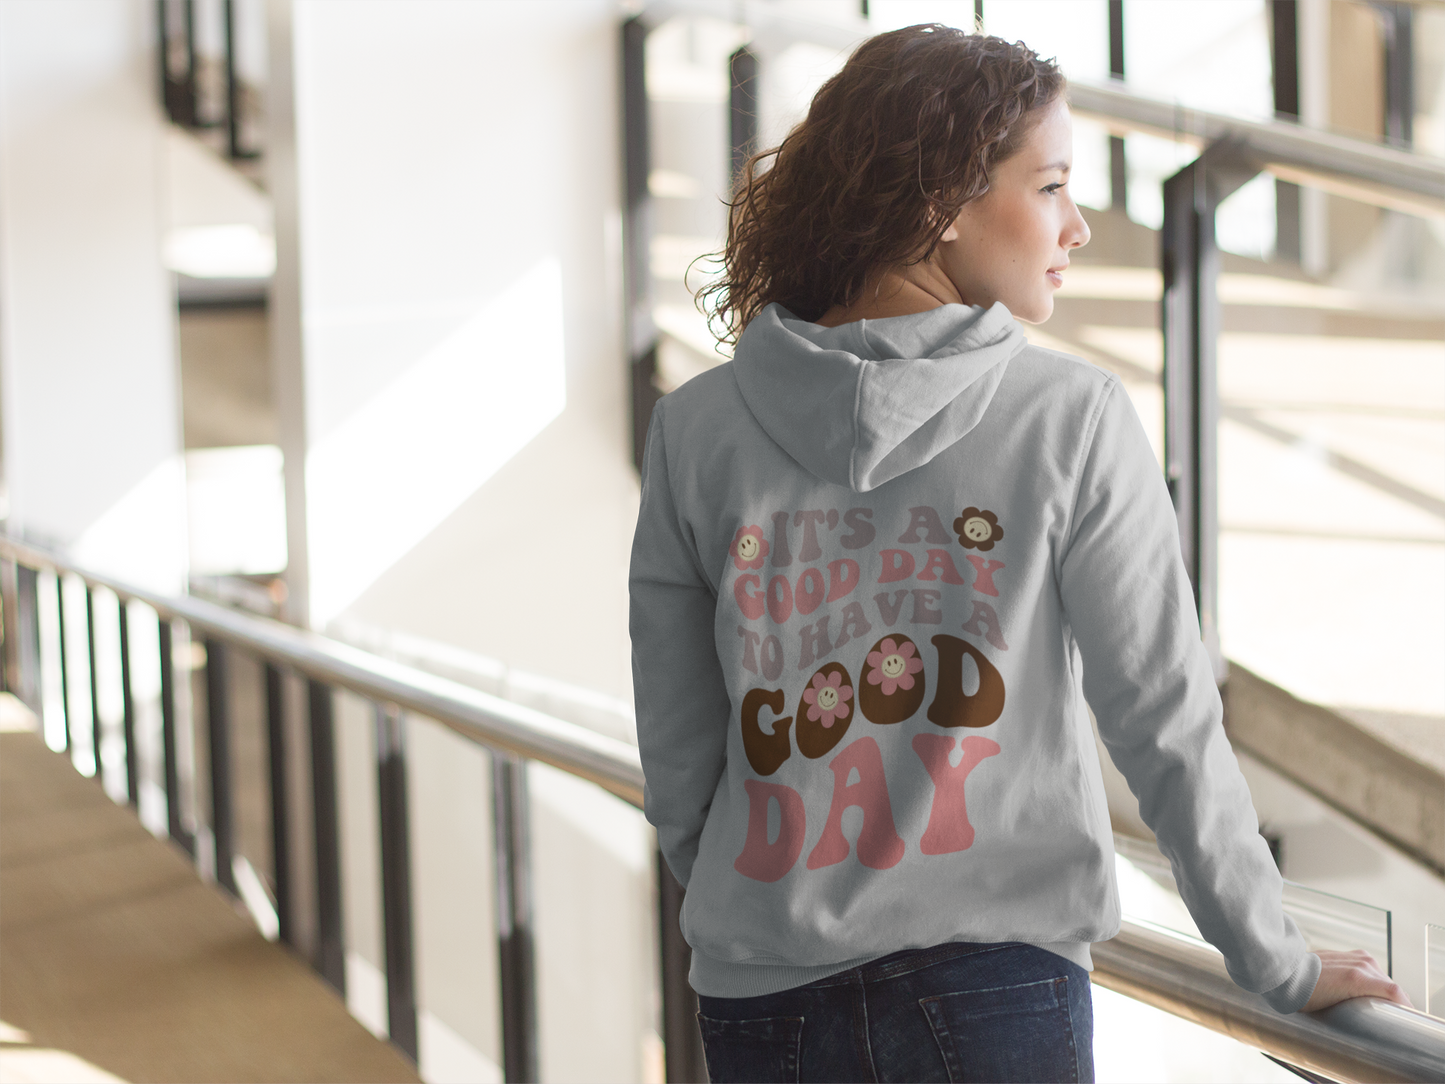 It's A Good Day to Have a Good Day Unisex Premium Full Zip Hoodie